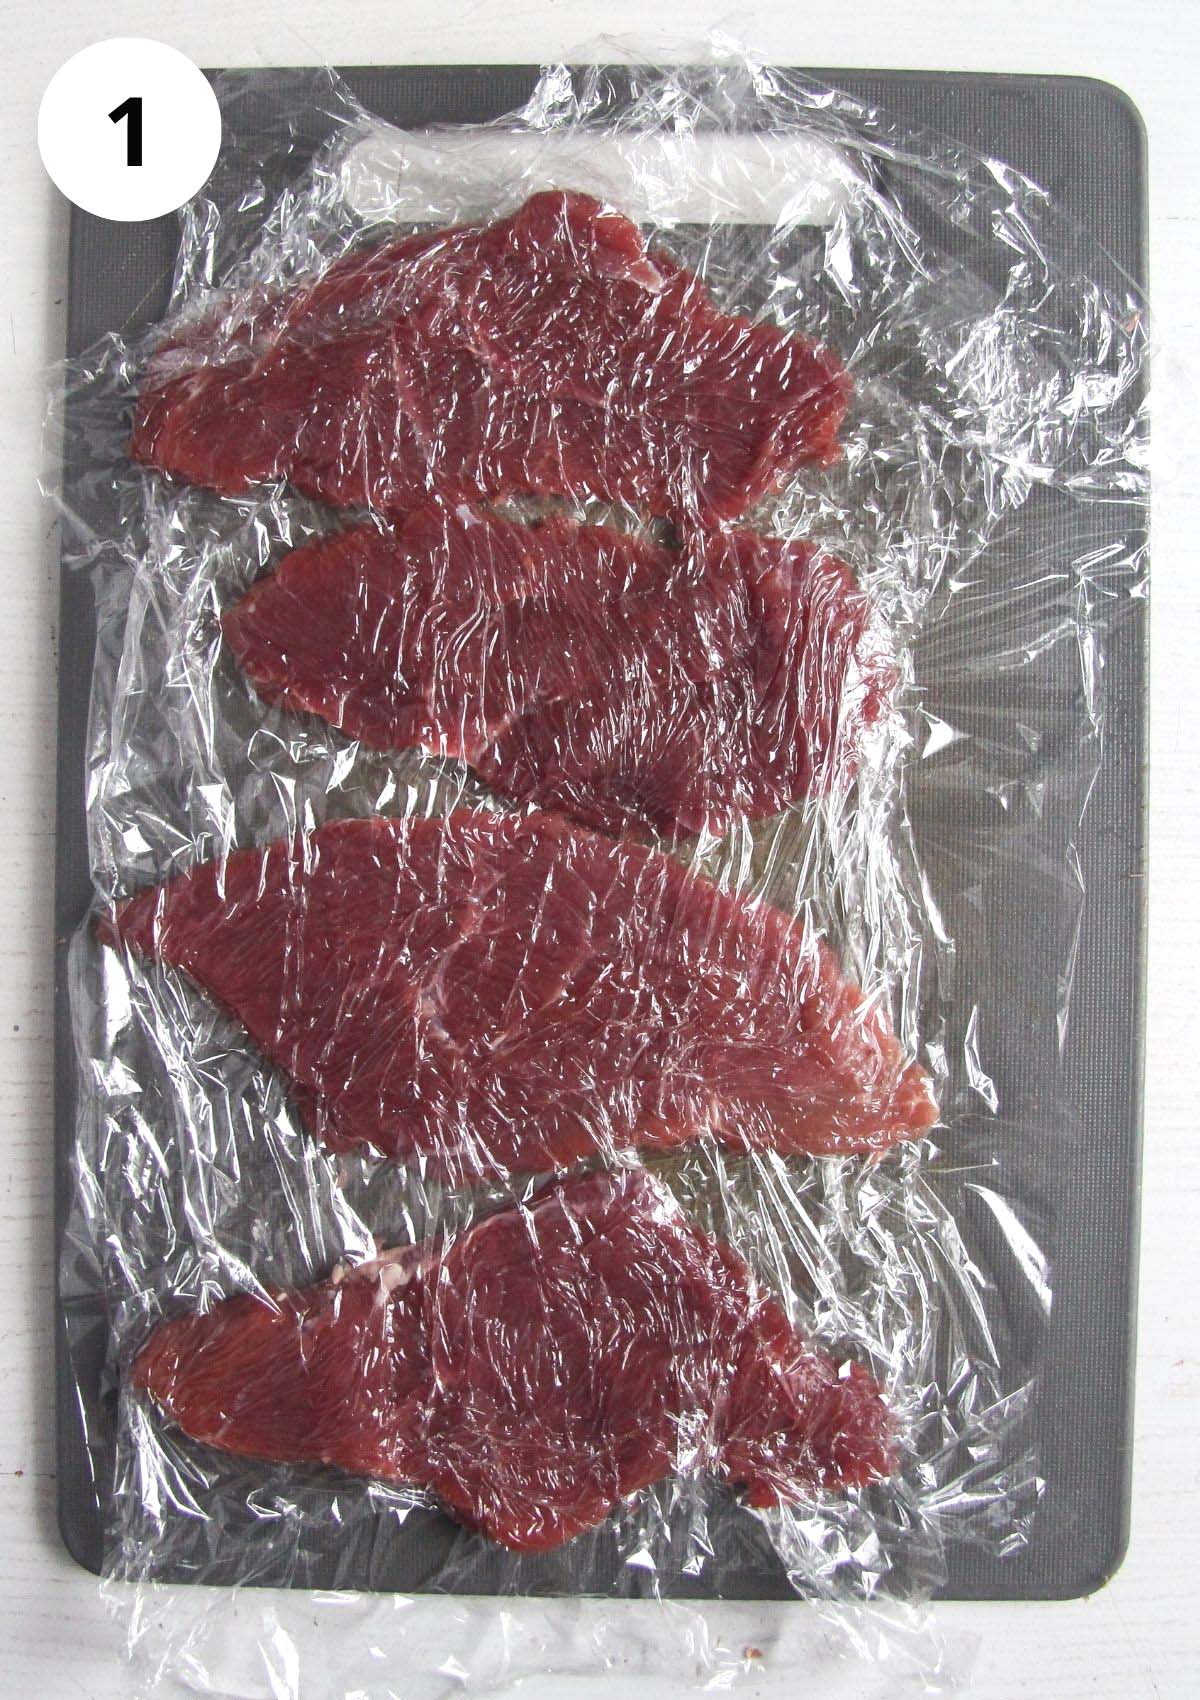 slices of raw veal pounded between sheets of cling film.